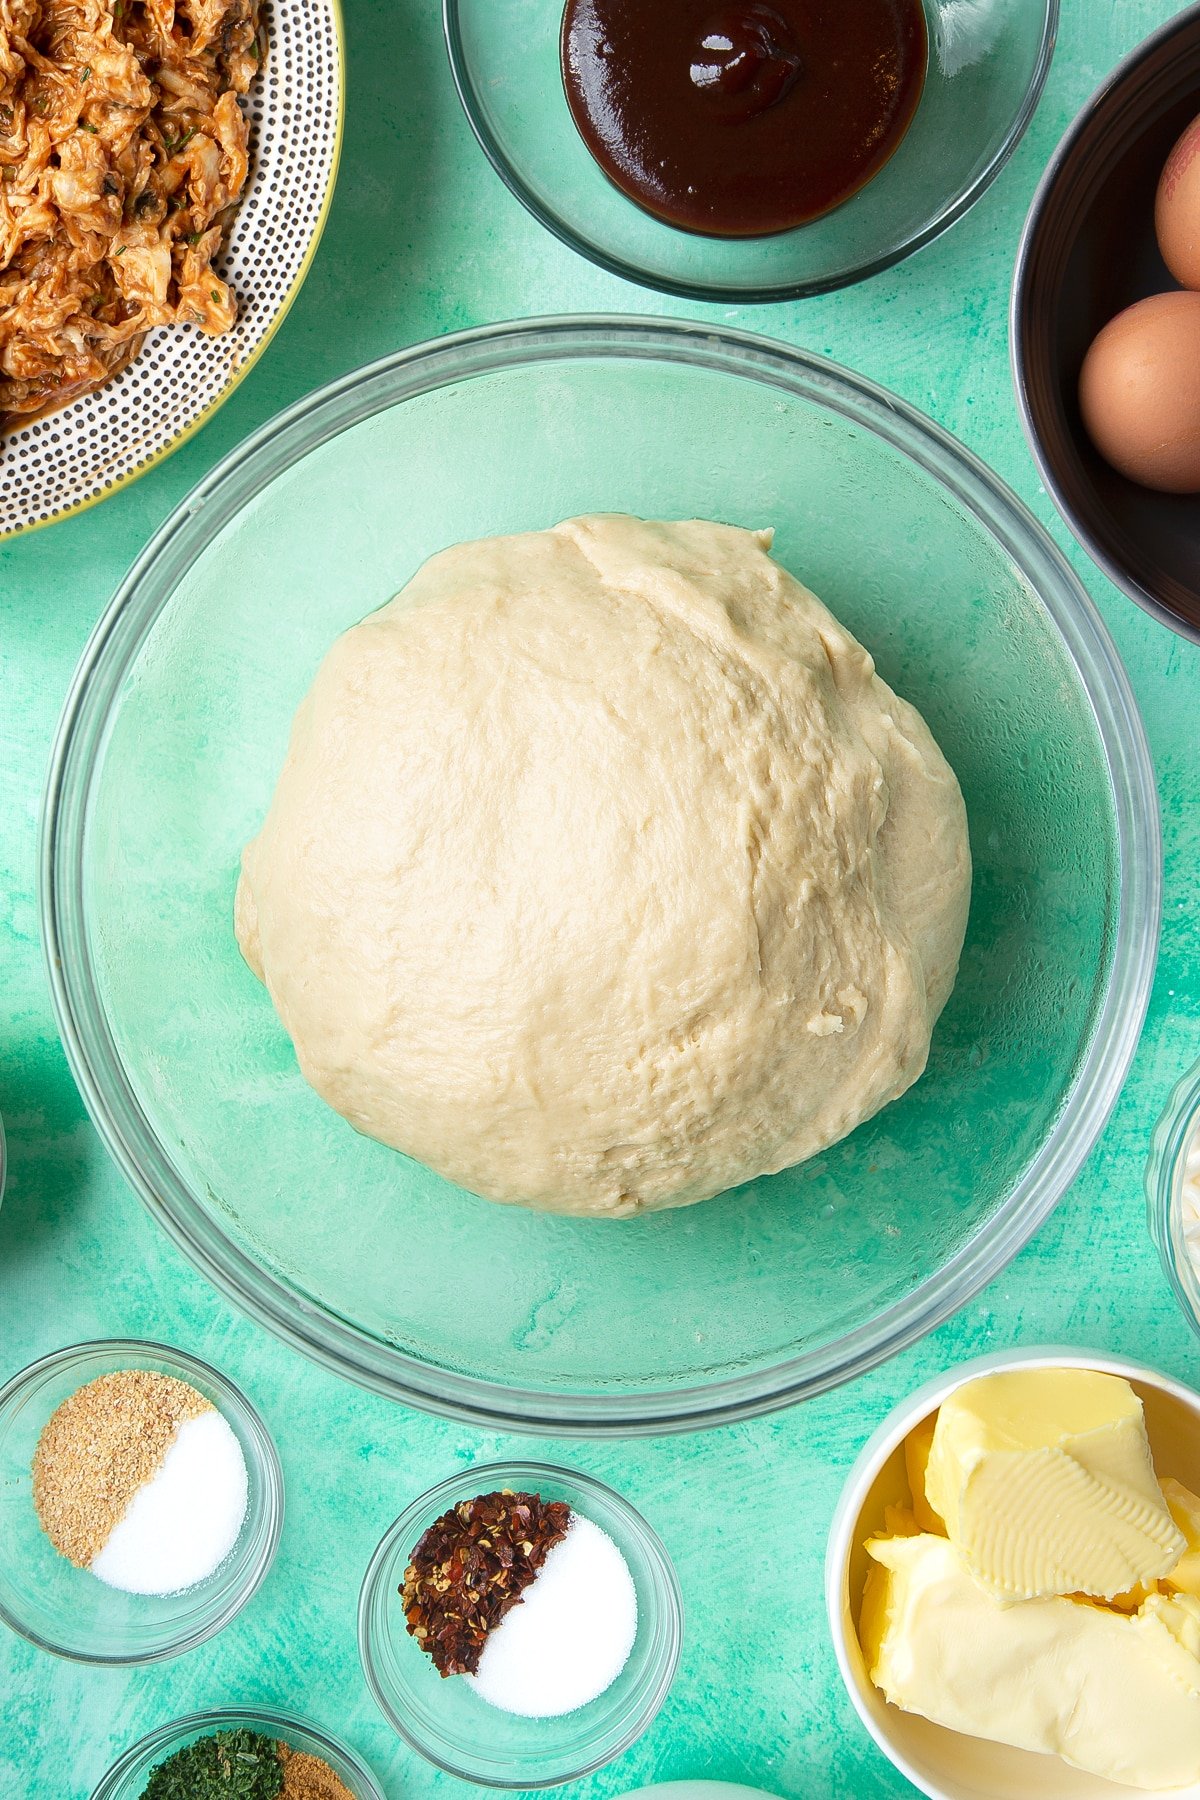 A kneaded and smooth bread dough ball in a glass mixing bowl. Ingredients to make chicken doughnuts surround the bowl.